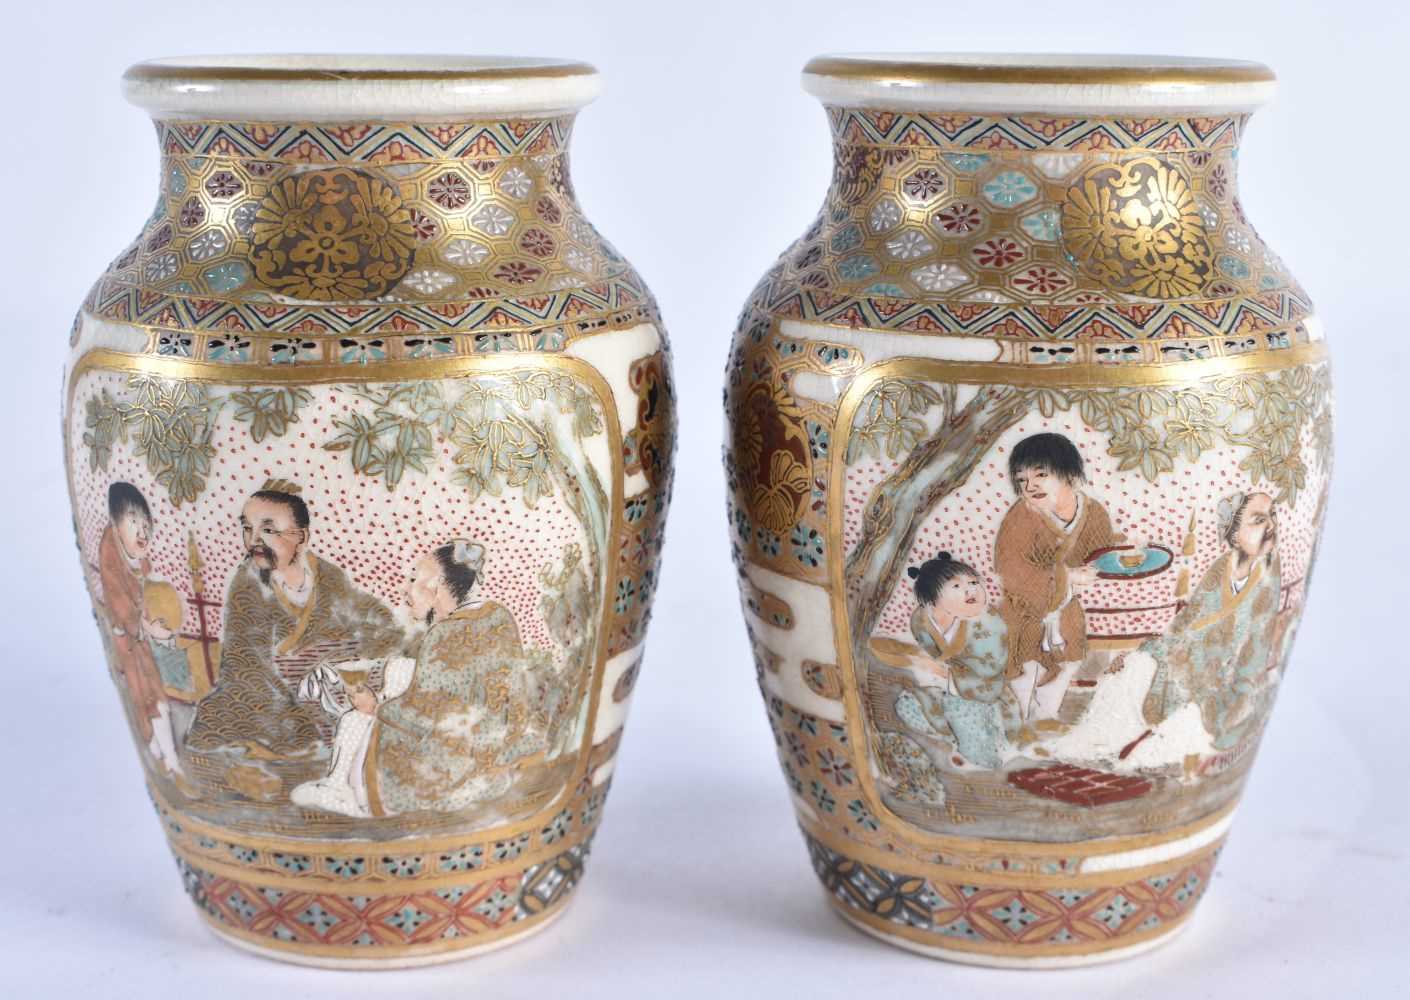 A SMALL PAIR OF 19TH CENTURY JAPANESE MEIJI PERIOD SATSUMA VASES painted with figures and - Image 3 of 8